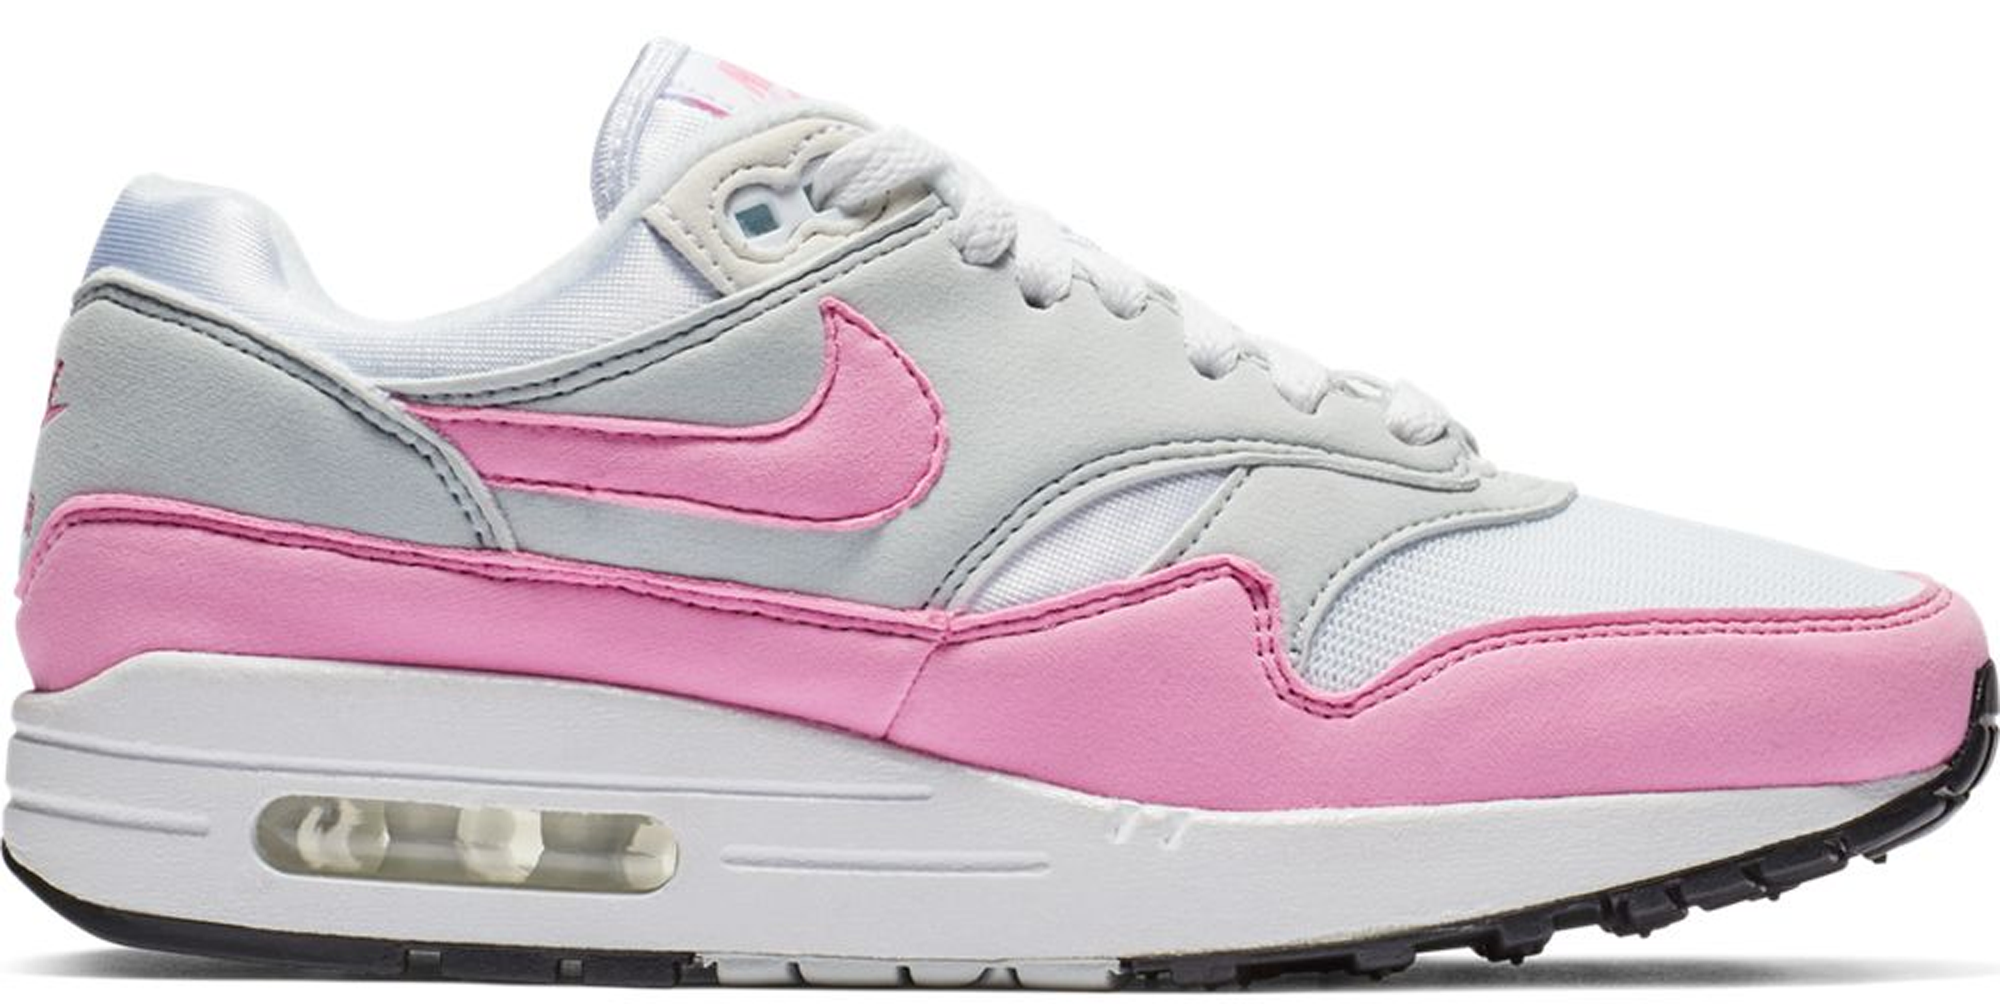 Nike Air Max 1 Psychic Pink (W 